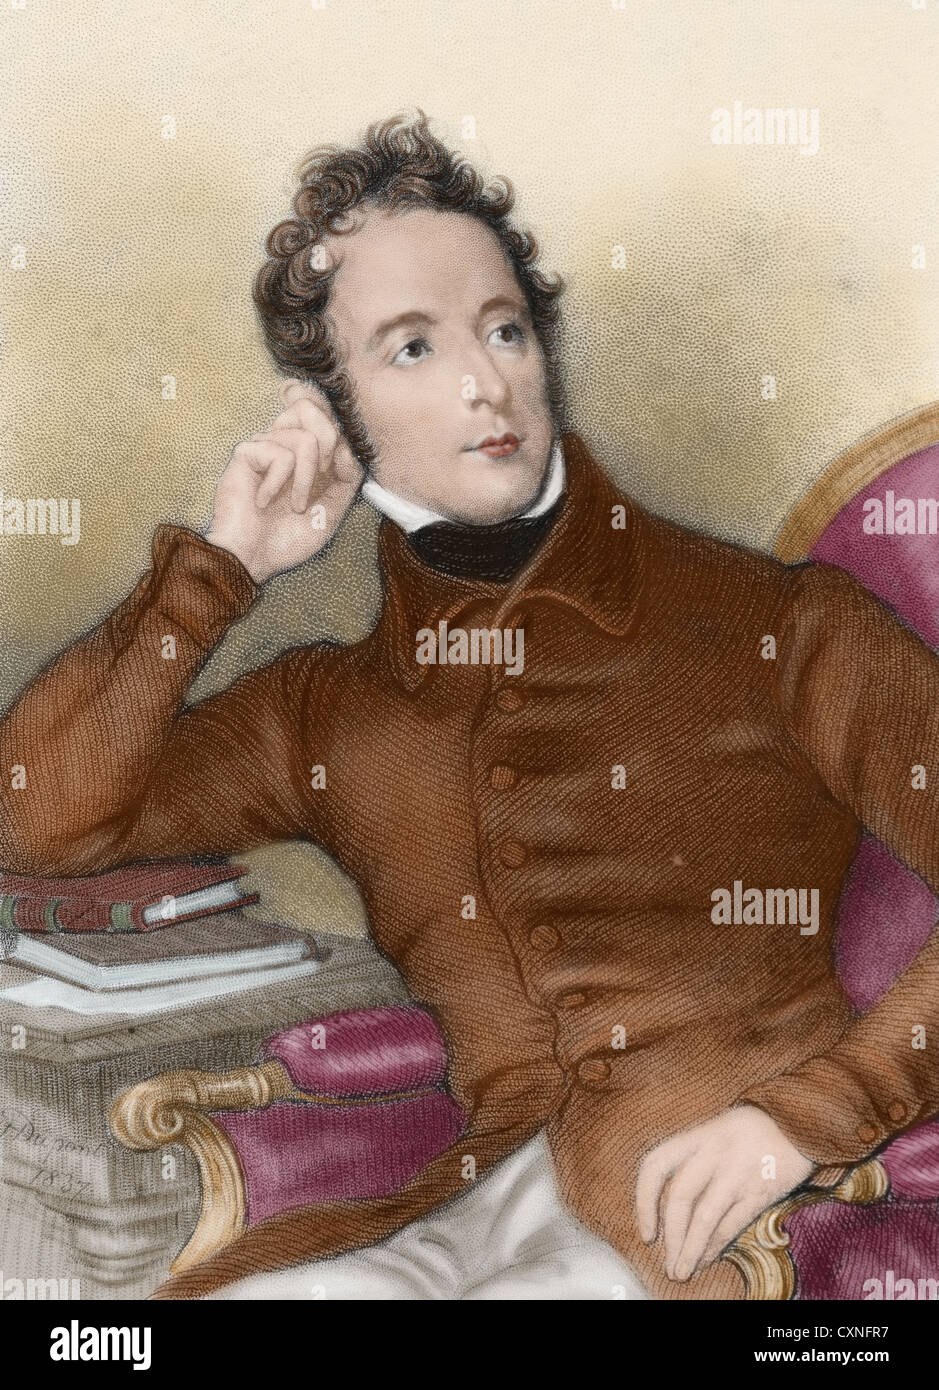 Lamartine, Alphonse de (1790-1869). French romantic writer and politician. Colored engraving. Stock Photo